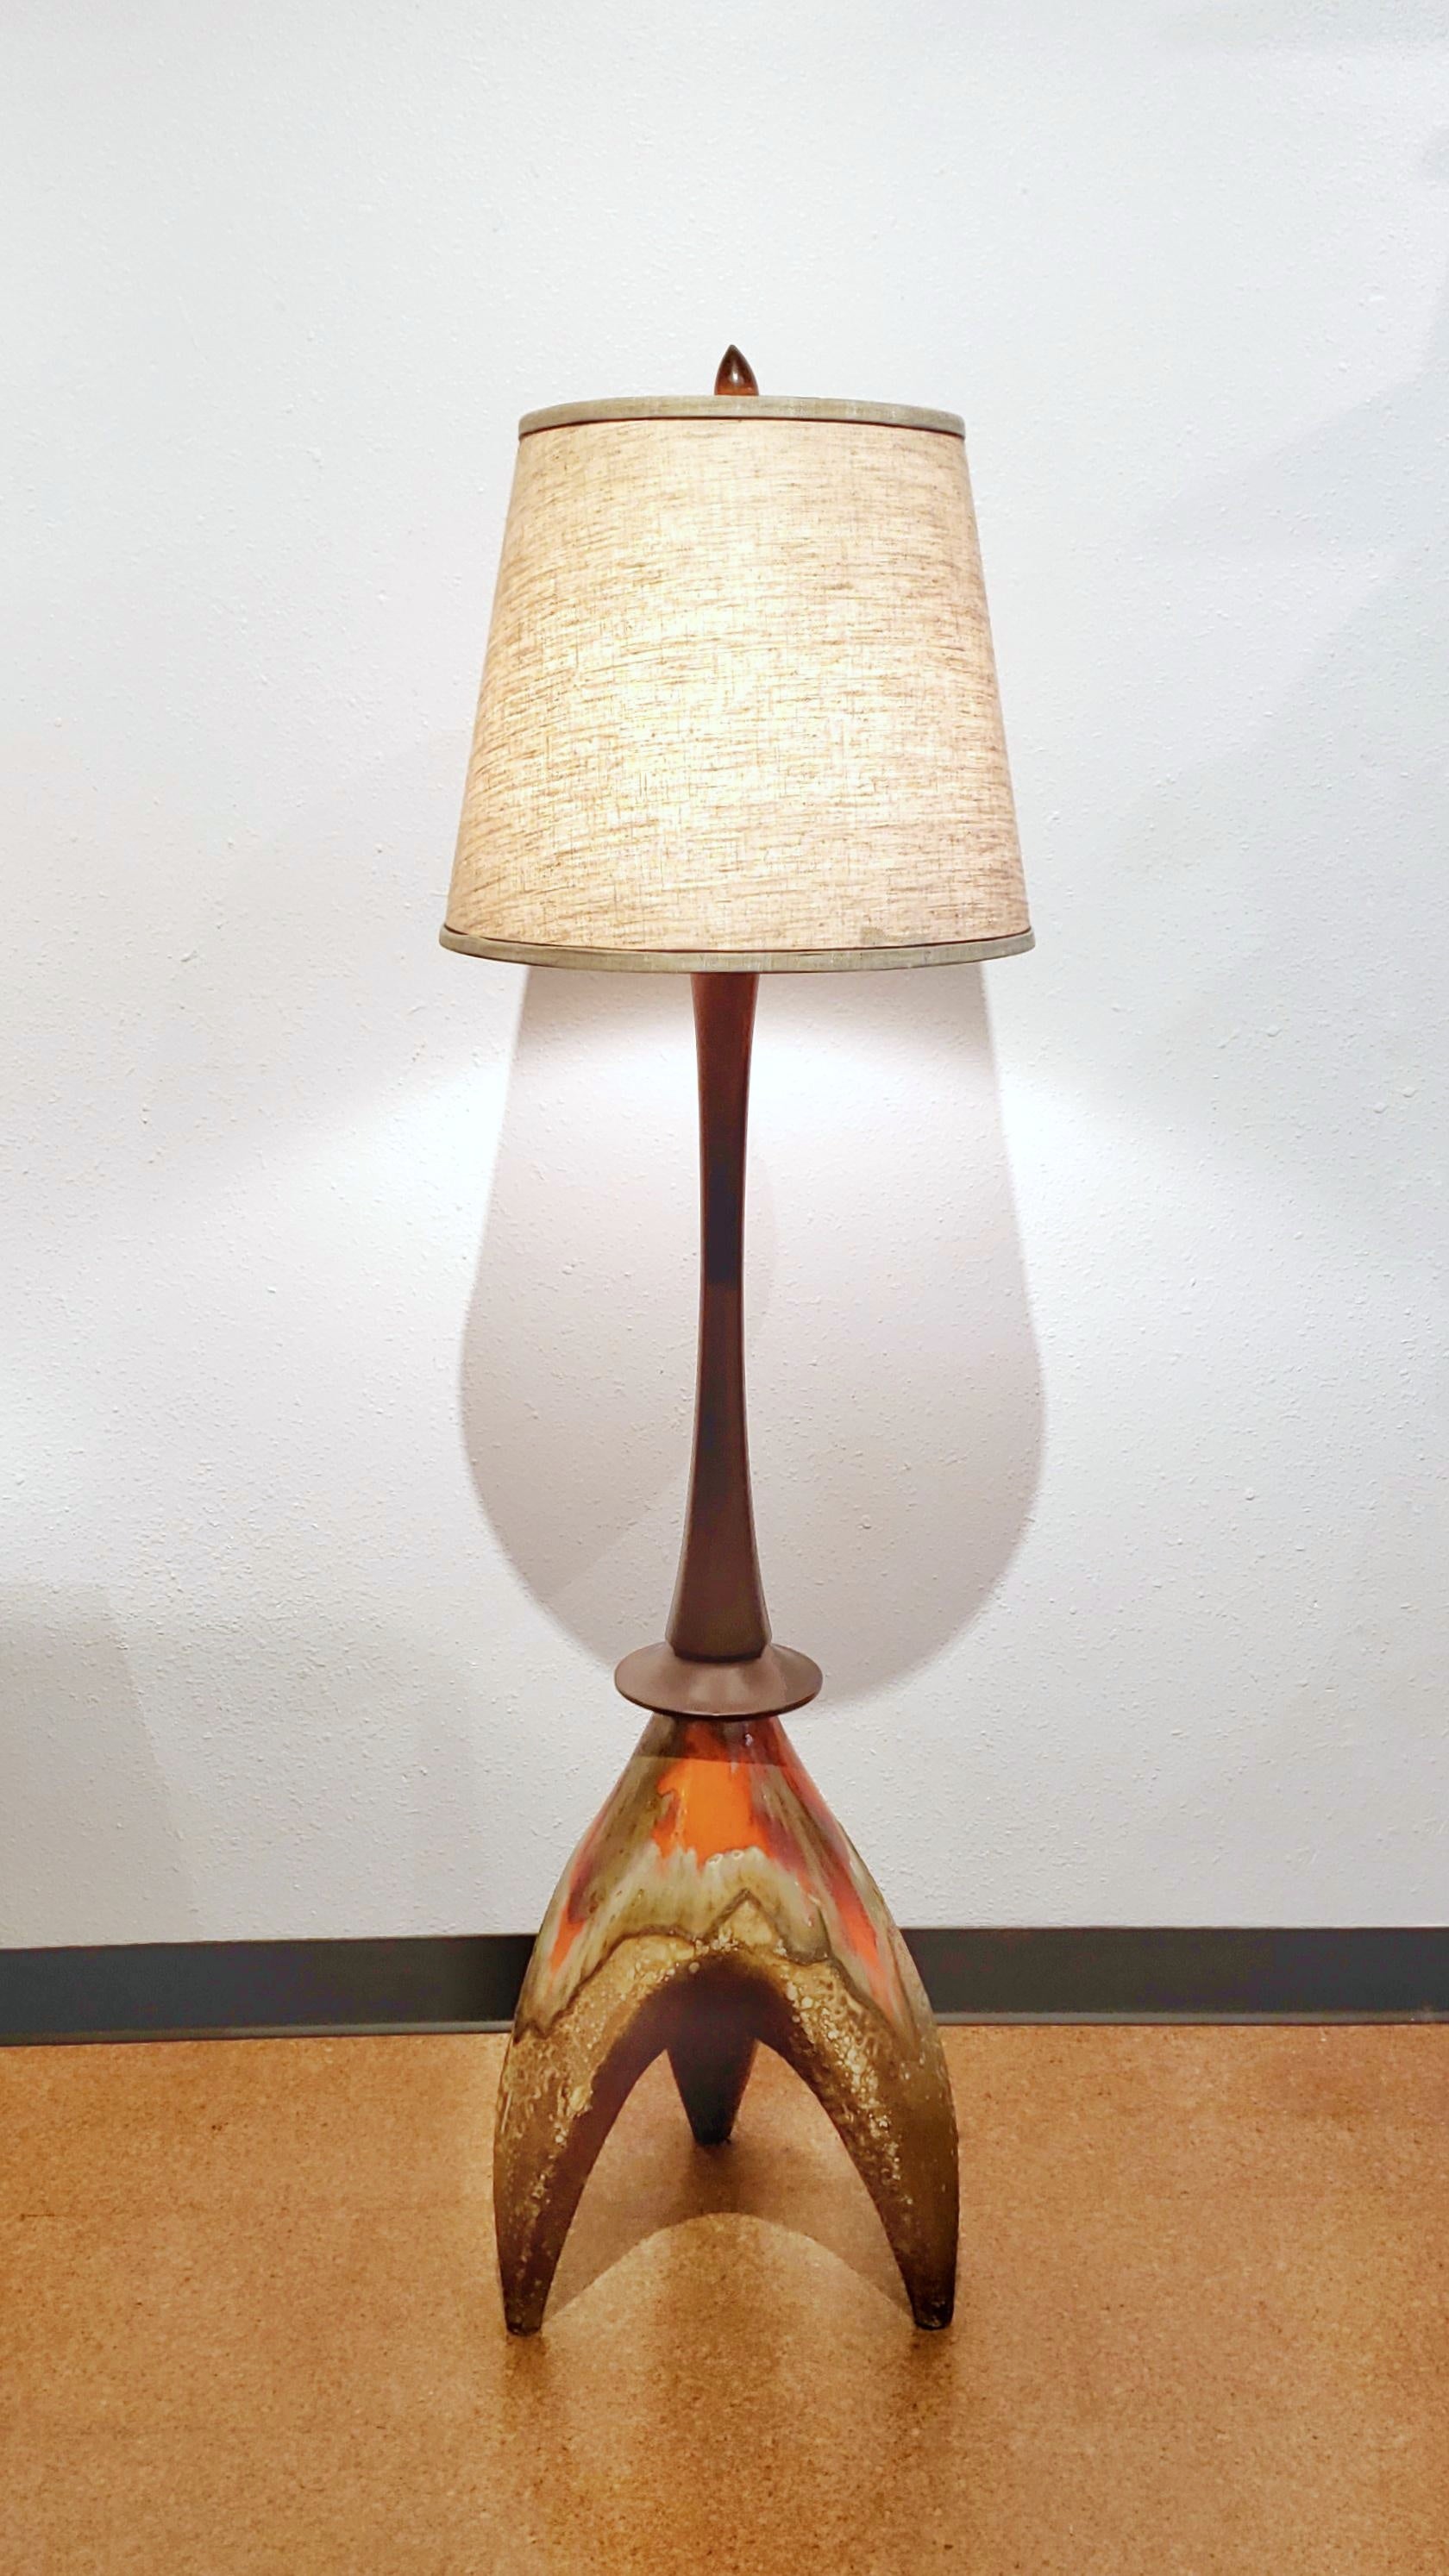 CERAMIC FLOOR LAMP IN THE STYLE OF MAURICE CHALVIGNAC